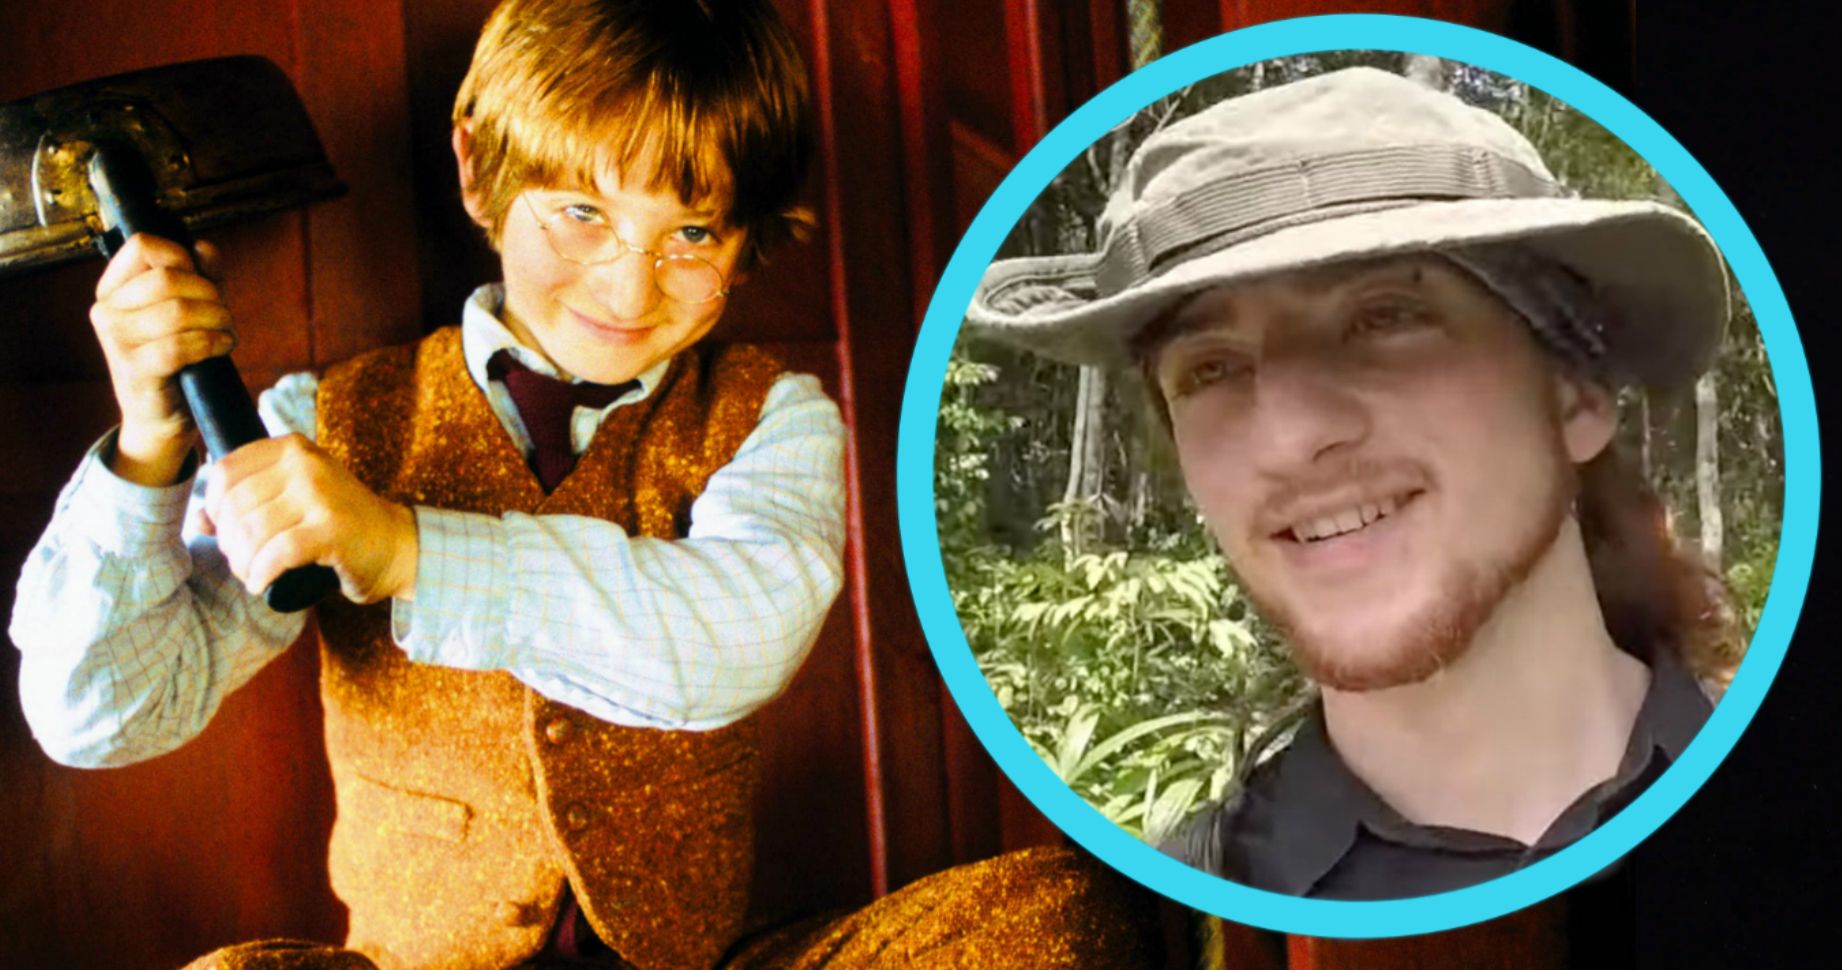 Raphael Coleman Dies, Nanny McPhee Star and Climate Change Activist Was 25